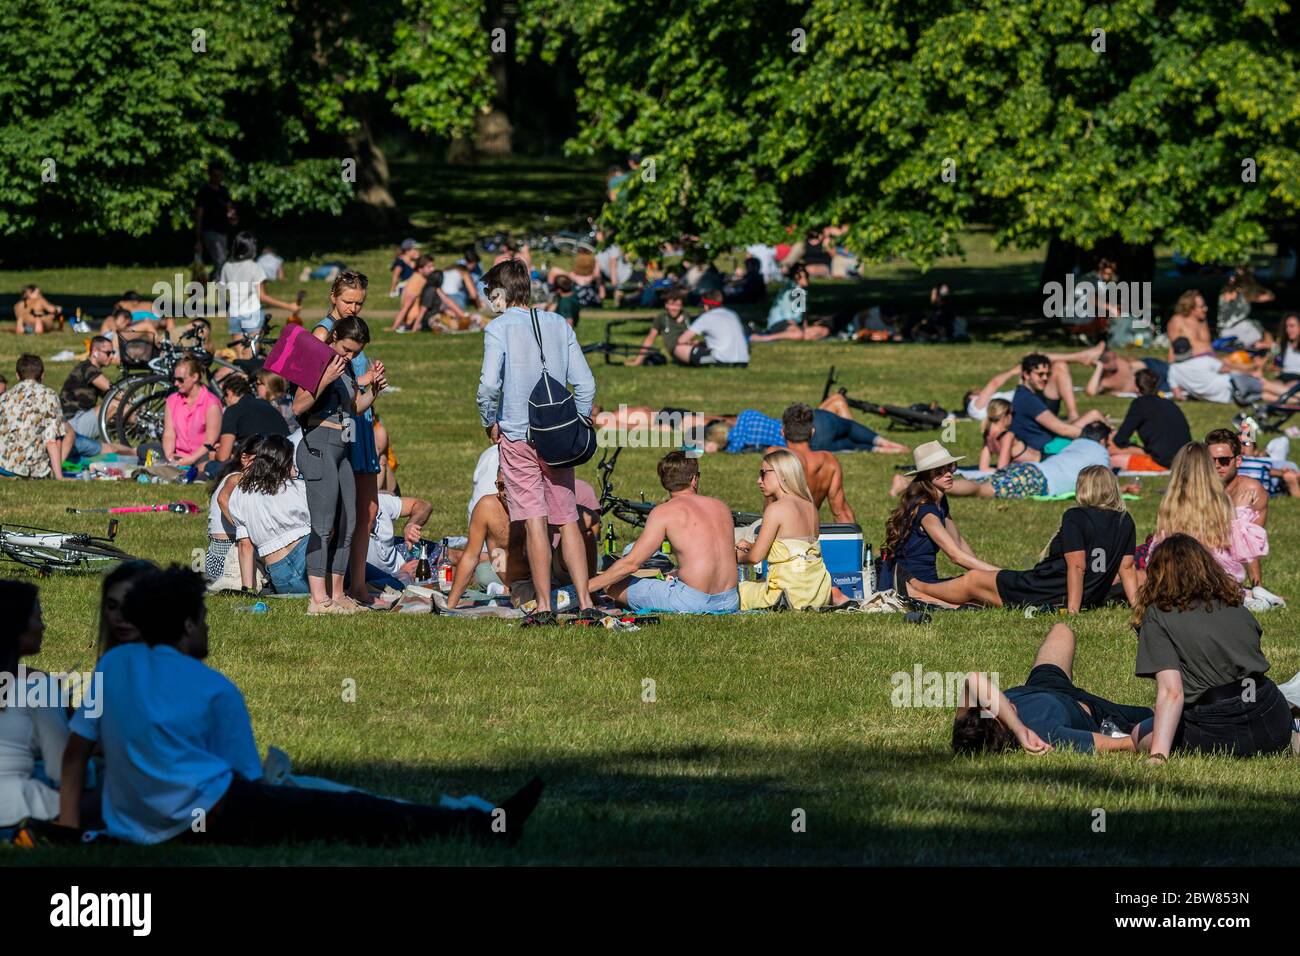 London, UK. 30th May, 2020. Large groups relax and meet, against guidance, in St James Park as the sun comes out again. The 'lockdown' continues for the Coronavirus (Covid 19) outbreak in London. Credit: Guy Bell/Alamy Live News Stock Photo